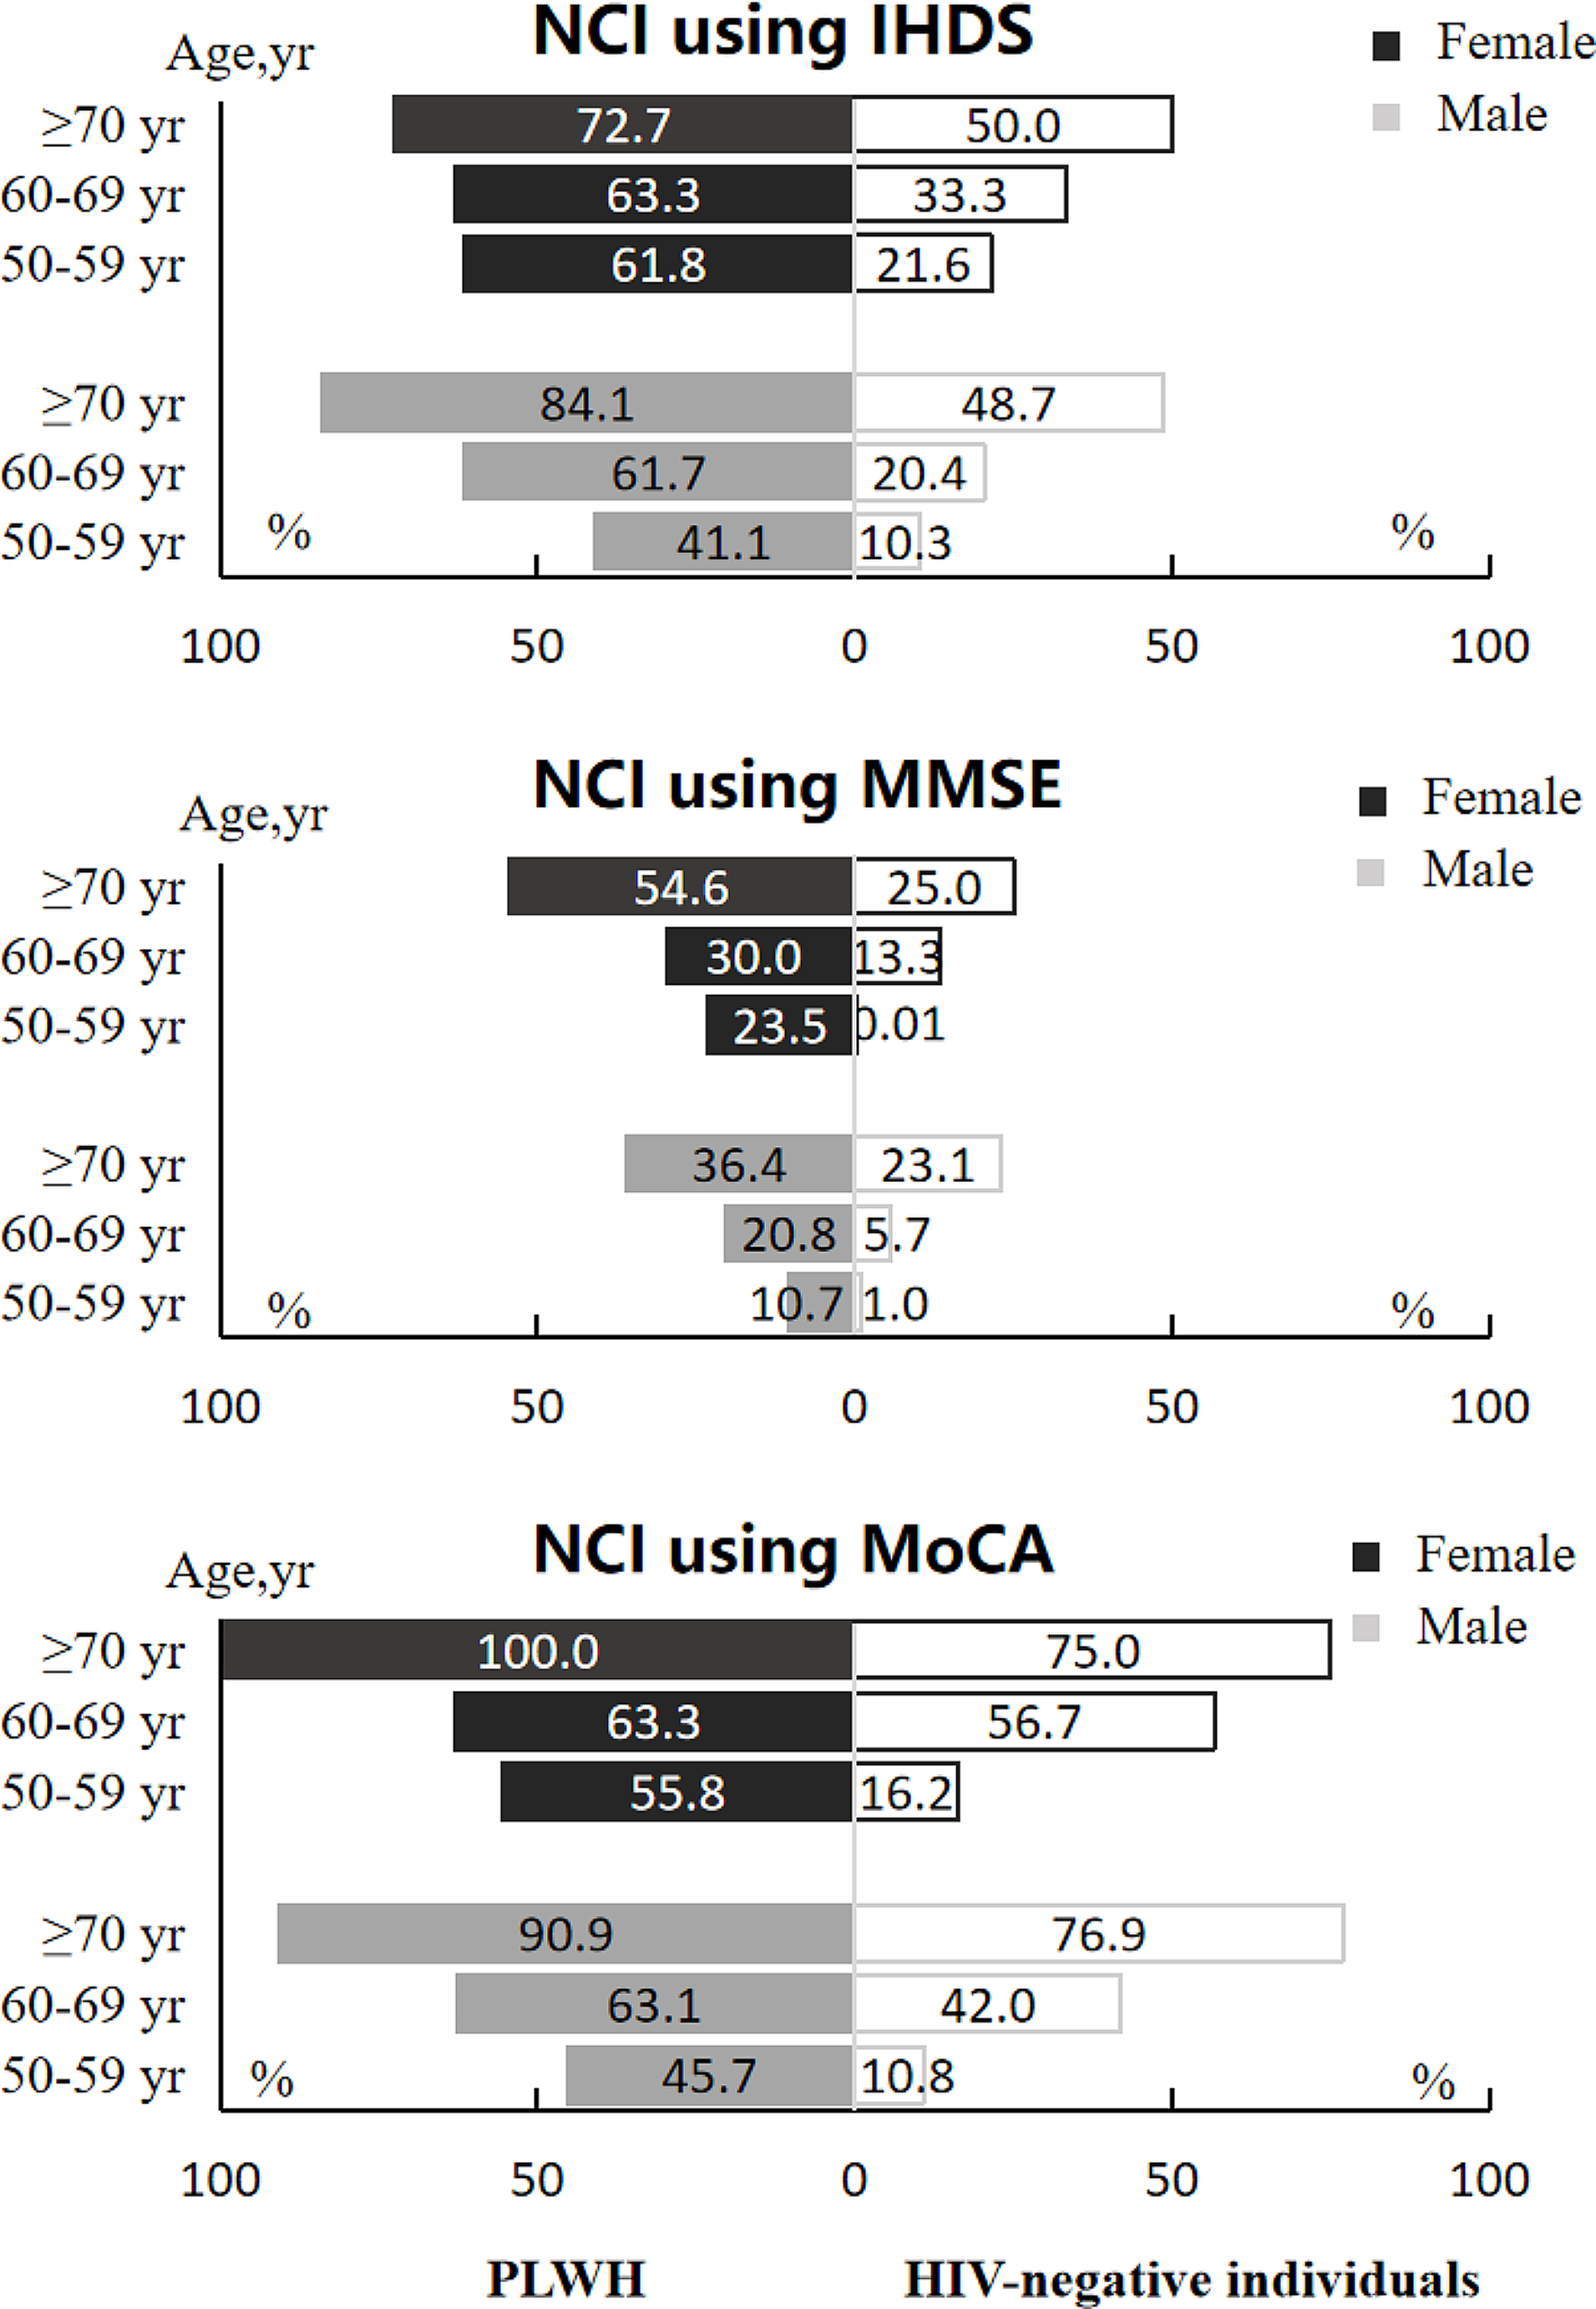 Cognitive impairment and neurocognitive profiles among people living with HIV and HIV-negative individuals older over 50 years: a comparison of IHDS, MMSE and MoCA